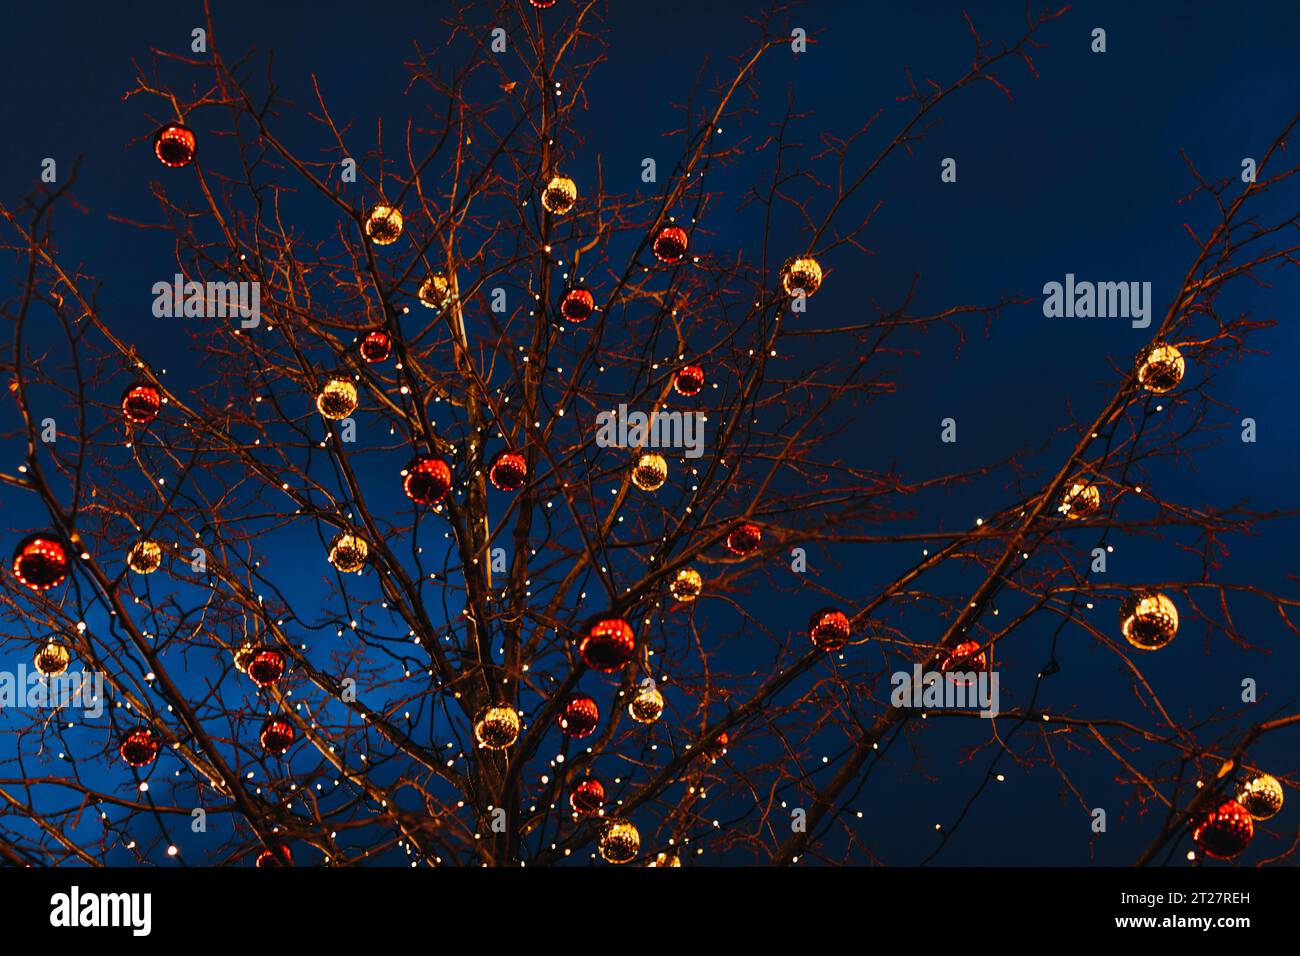 Dried tree branches decorated with red and golden Christmas glittering balls. New Year's outdoor festive decorations against a blue night sky. Magic w Stock Photo